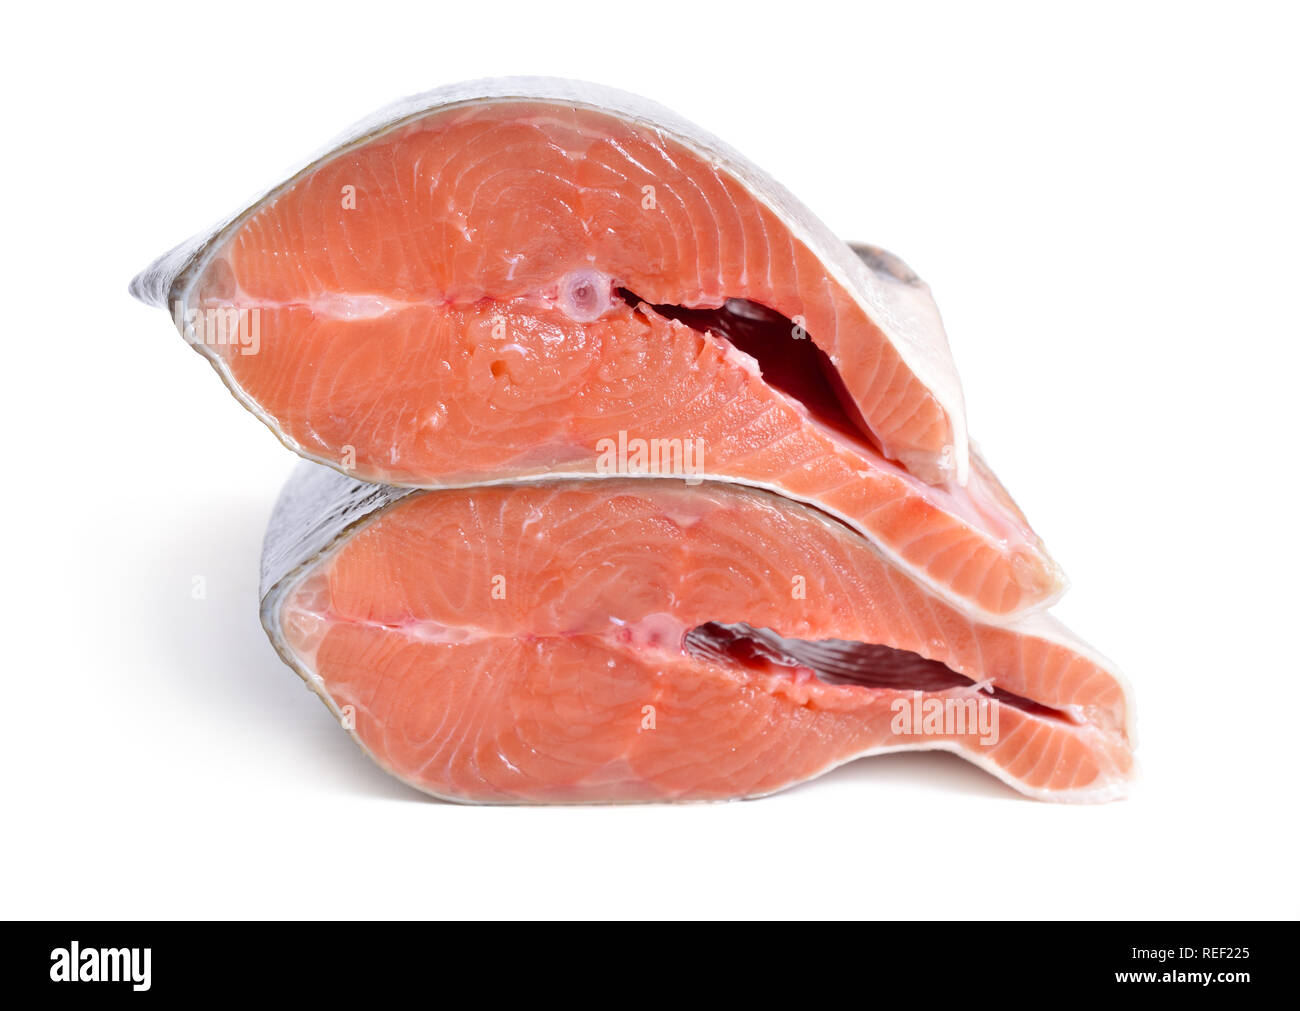 https://c8.alamy.com/comp/REF225/pieces-of-pink-salmon-isolated-on-white-background-REF225.jpg